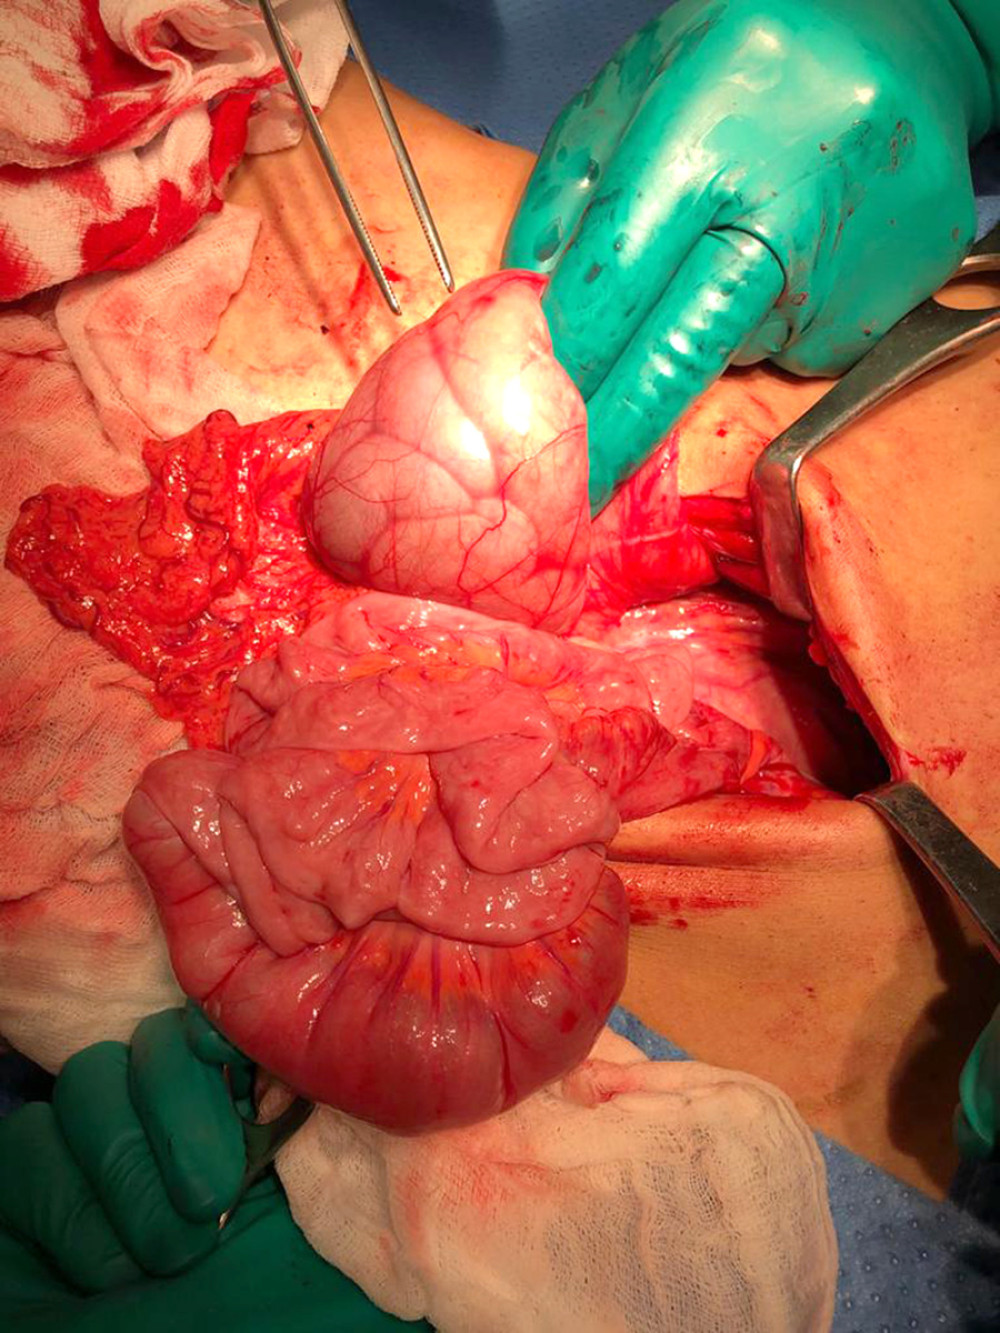 Jejunal loops presenting with a sac-like appearance after median laparotomy.